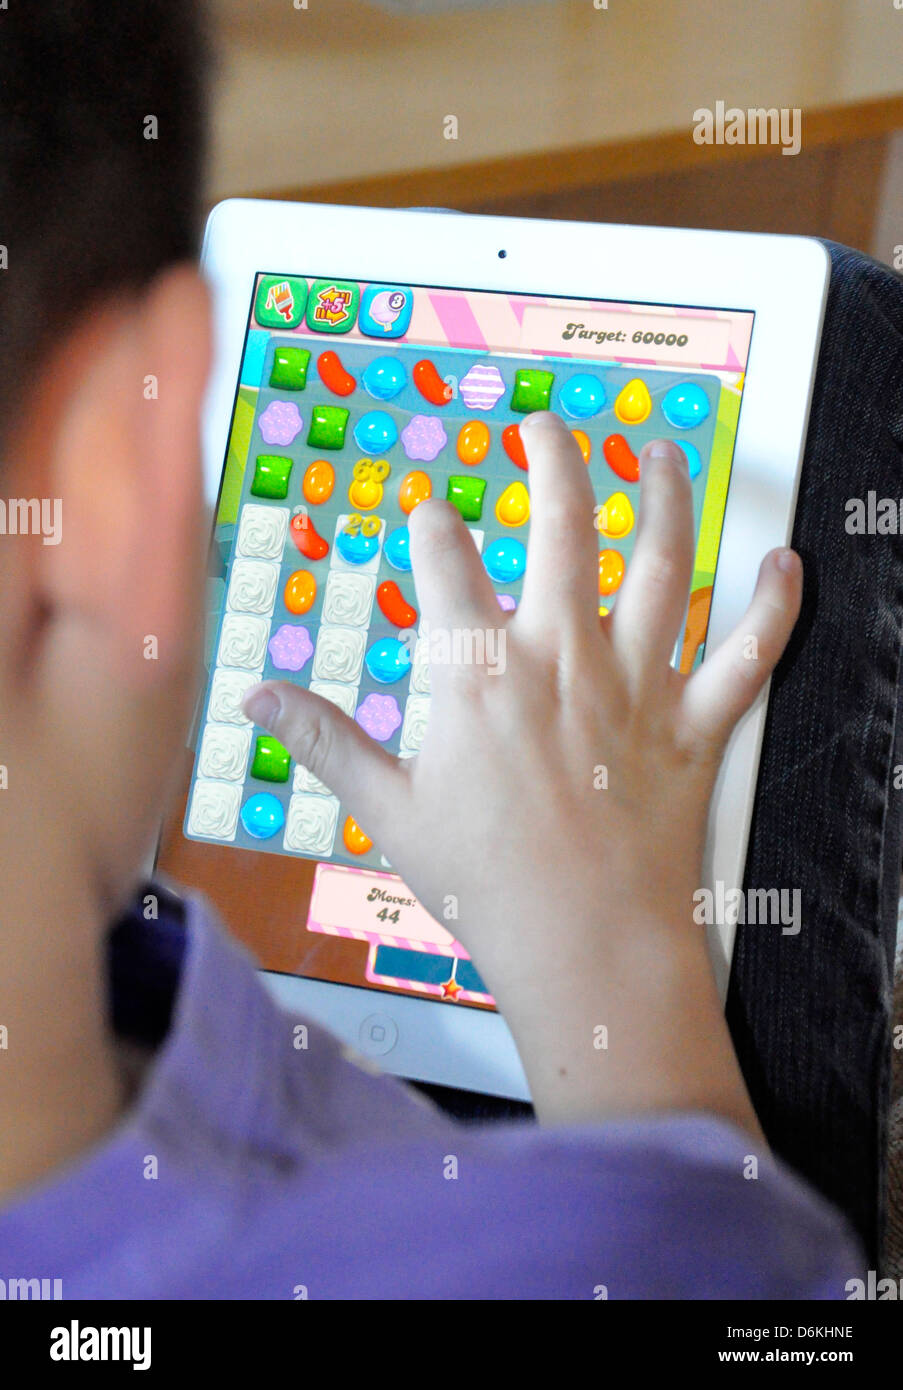 candy crush saga game ipad boy playing addicted winning concentrate game child Stock Photo